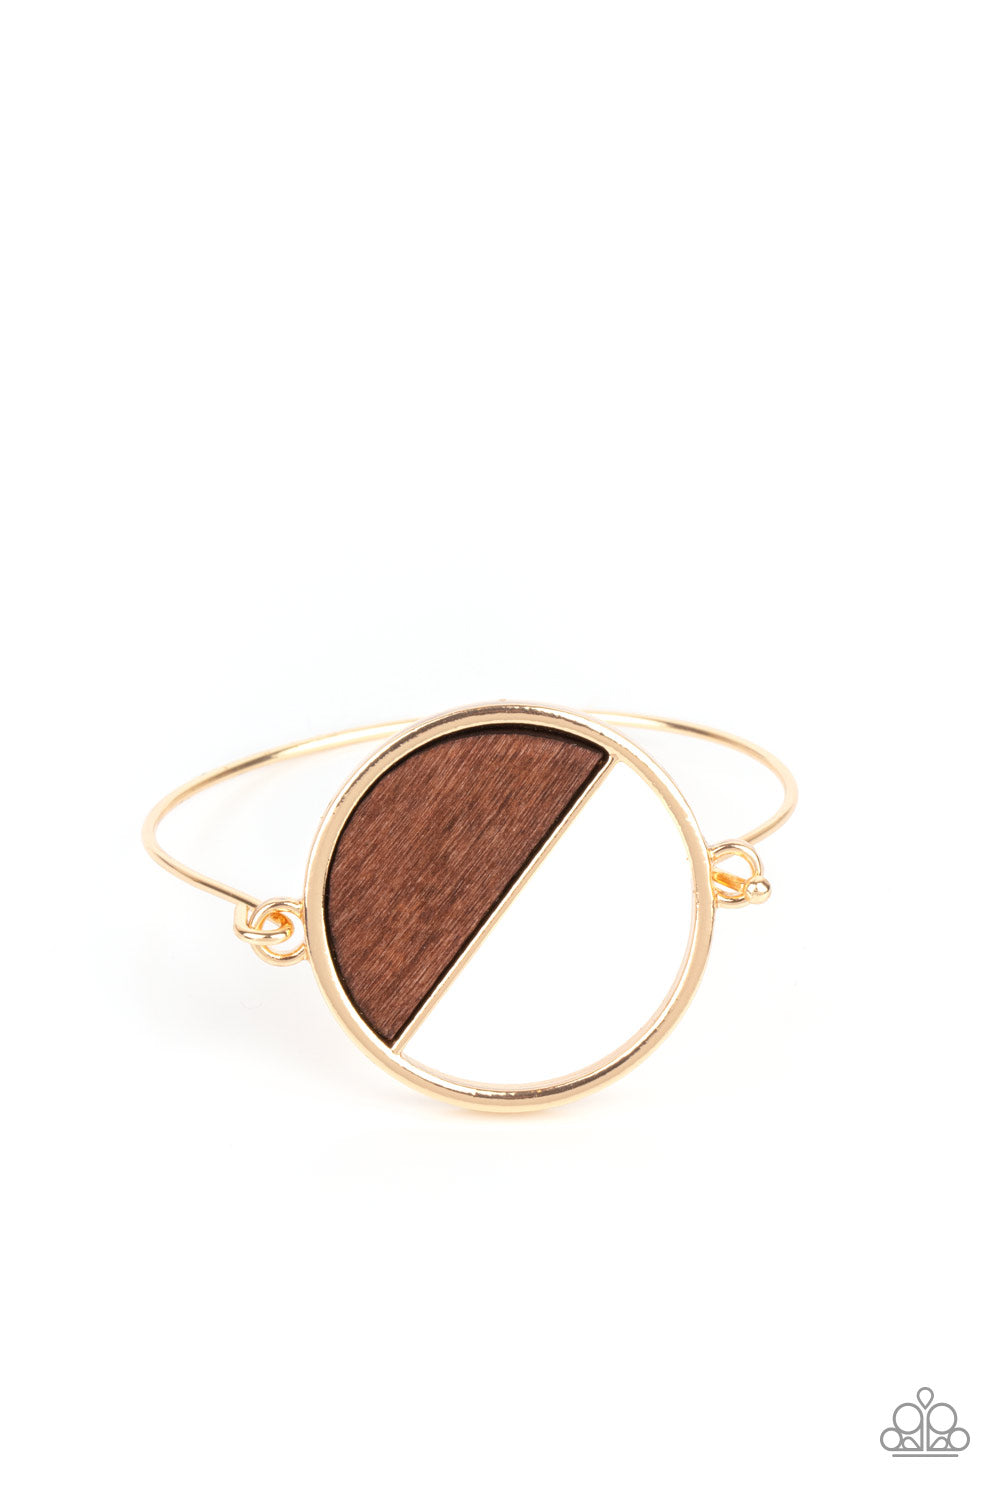 Timber Trade - Gold & Wooden Bracelet - Paparazzi Accessories 